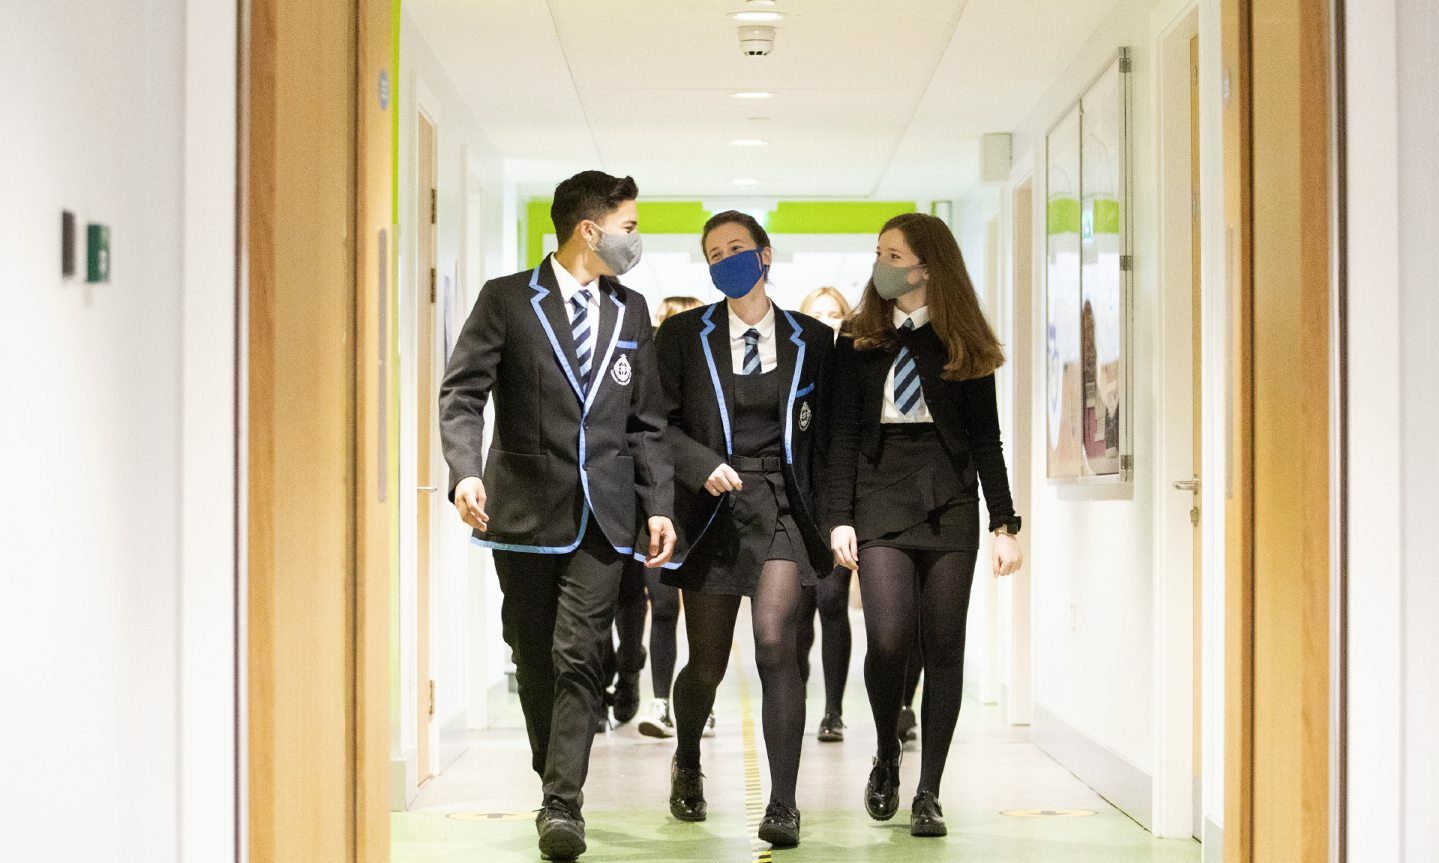 Face masks will still be required as staff and pupils move around school communal areas.